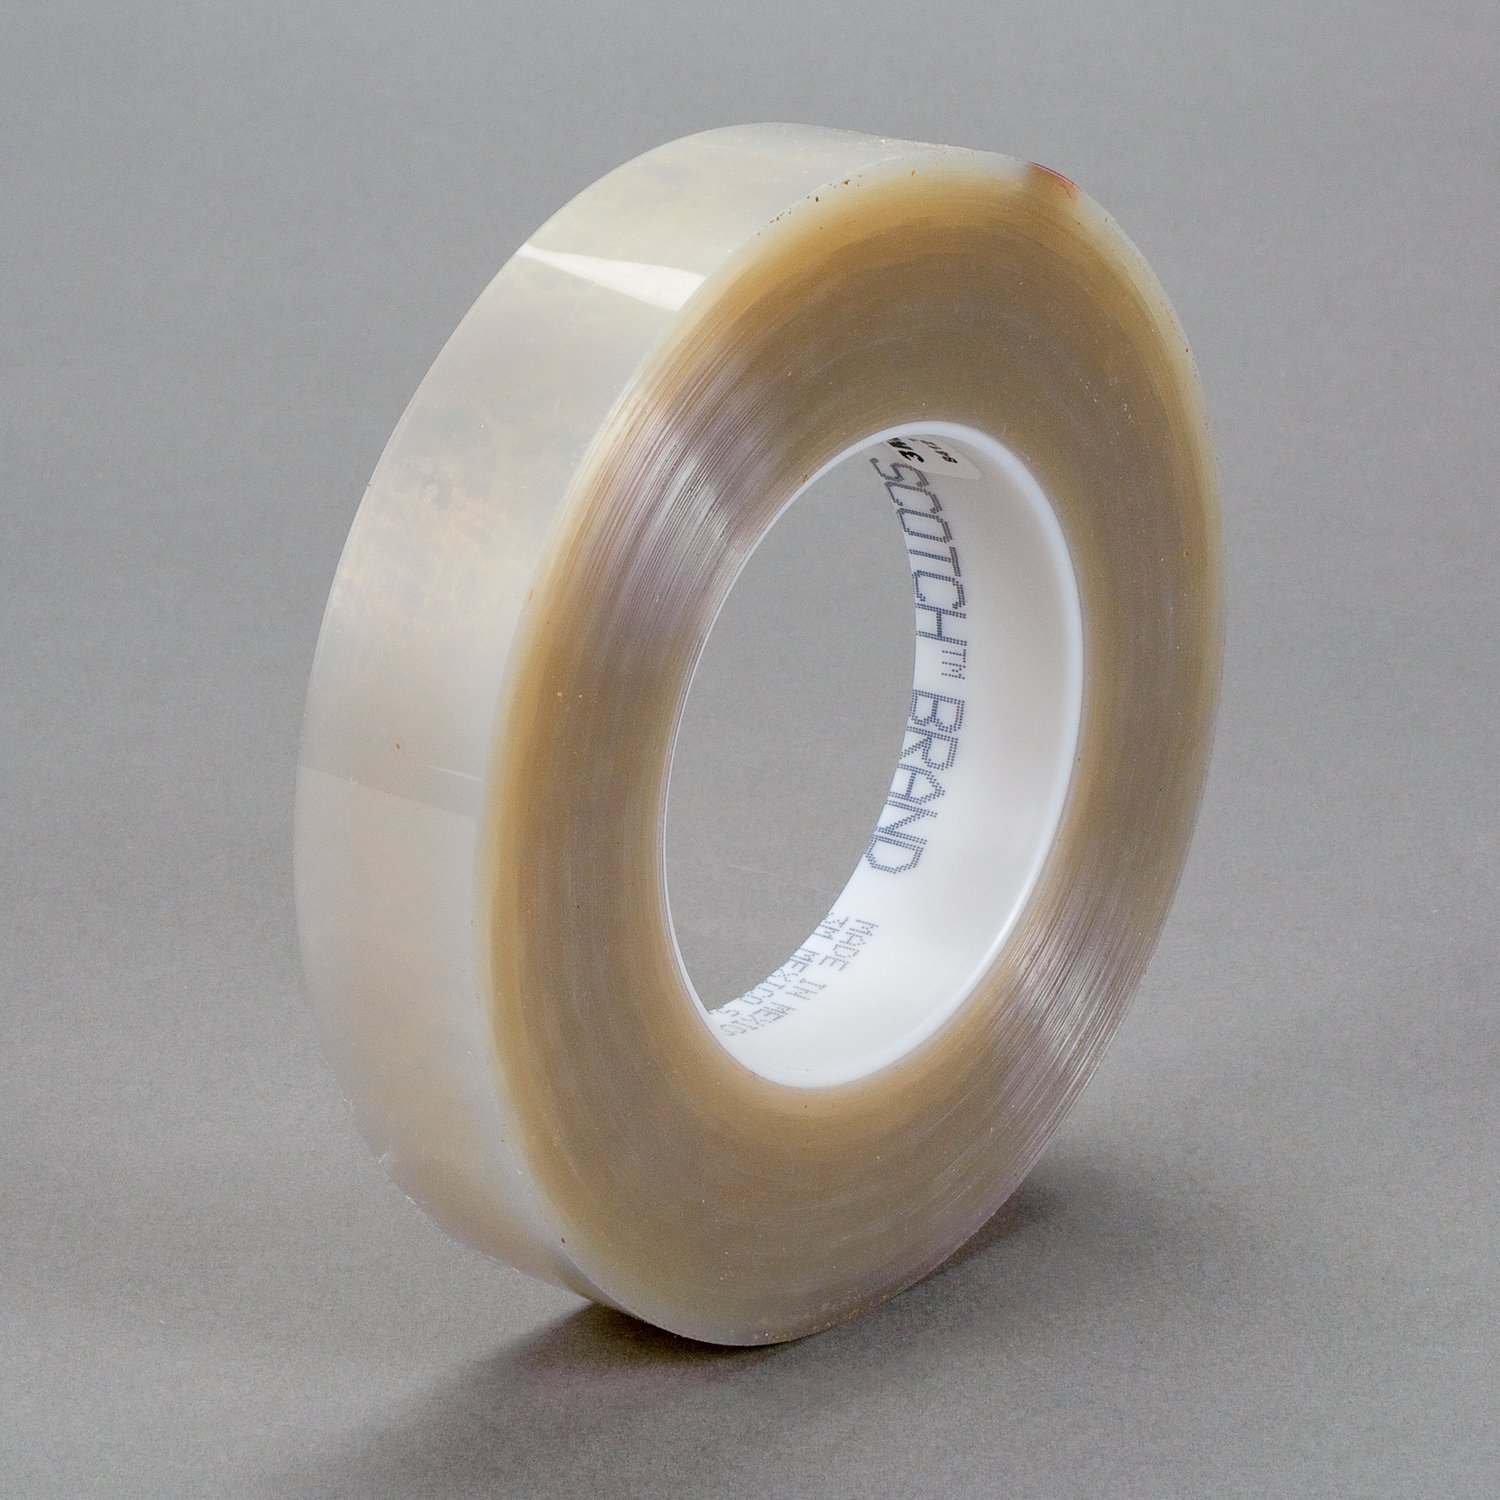 7010048705 - 3M Polyester Tape 8412, Transparent, 1 1/4 in x 72 yd, 6.3 mil, 28 rolls per case